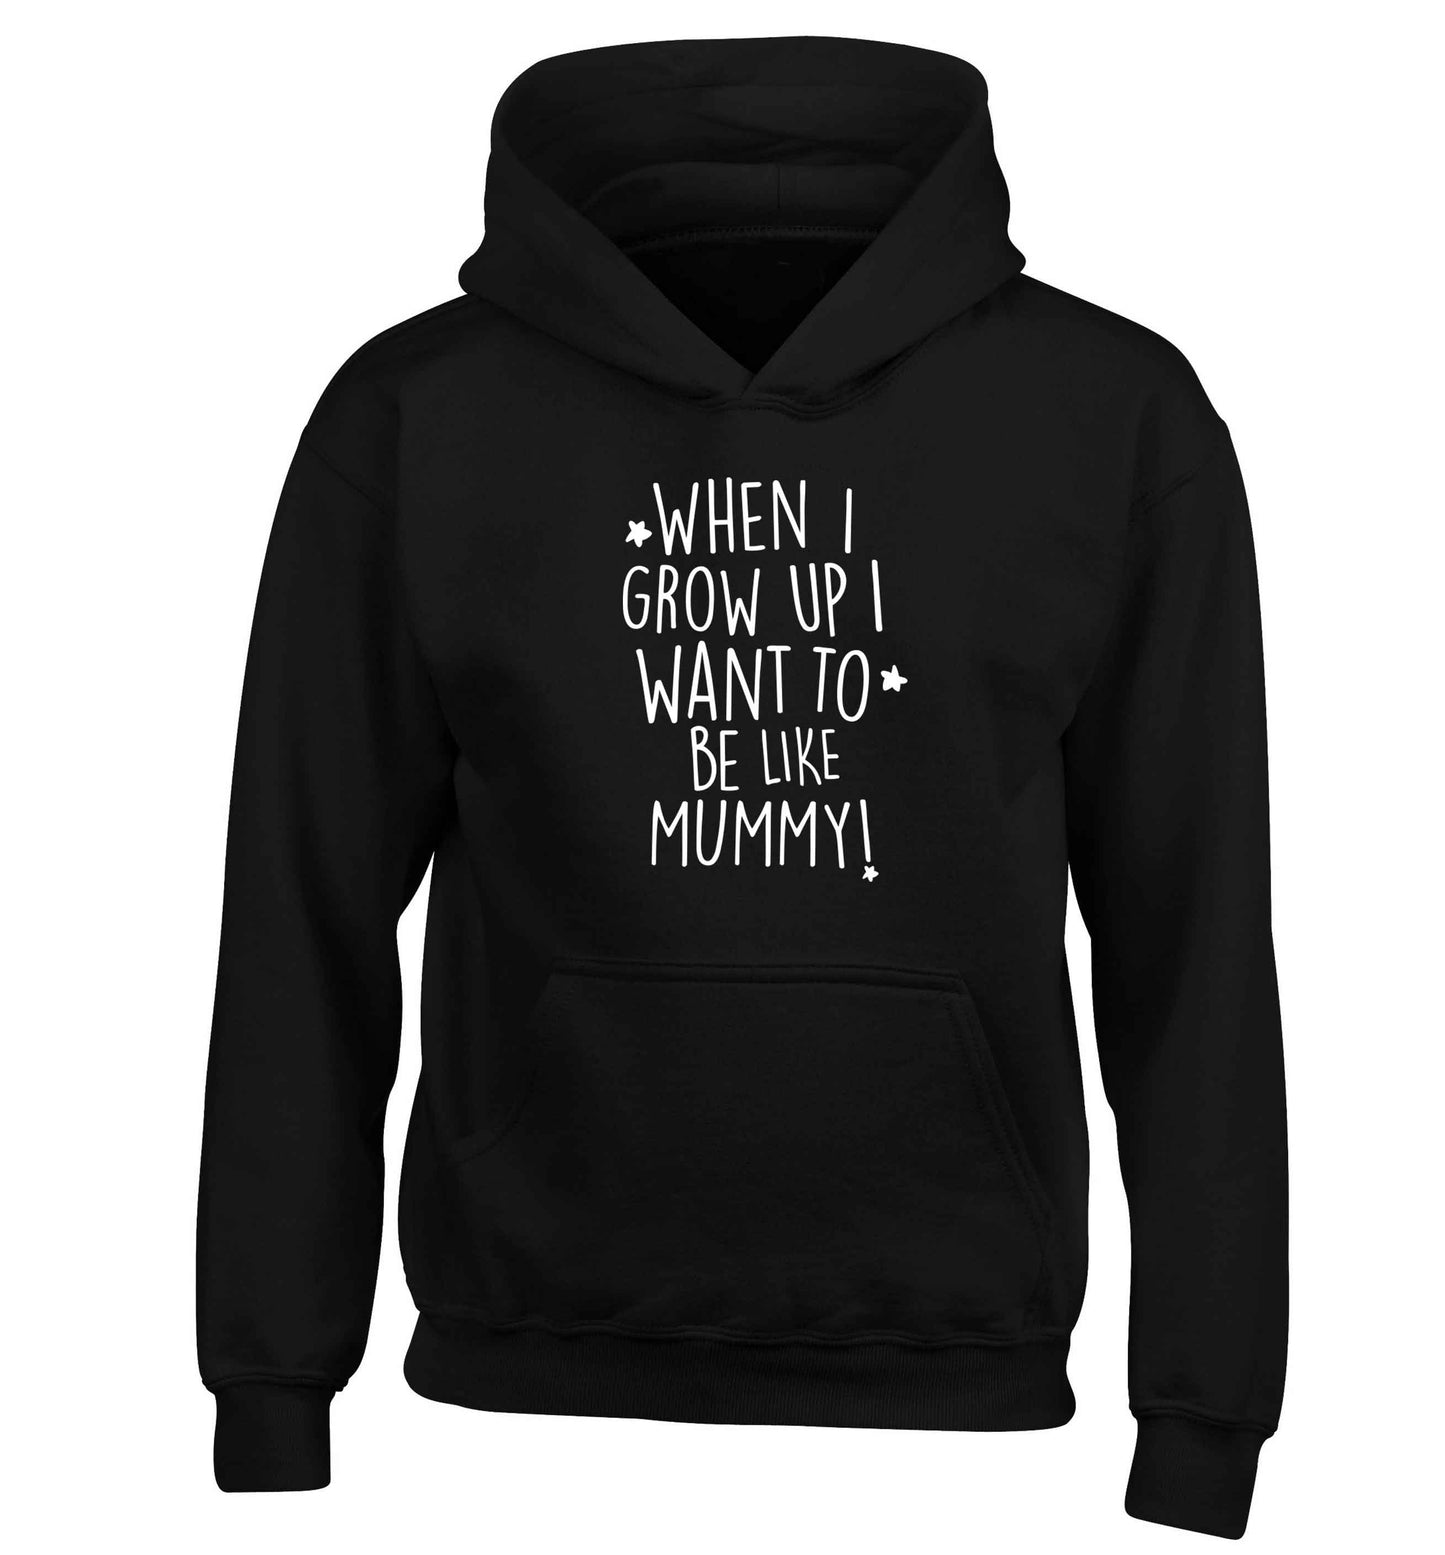 When I grow up I want to be like my mummy children's black hoodie 12-13 Years